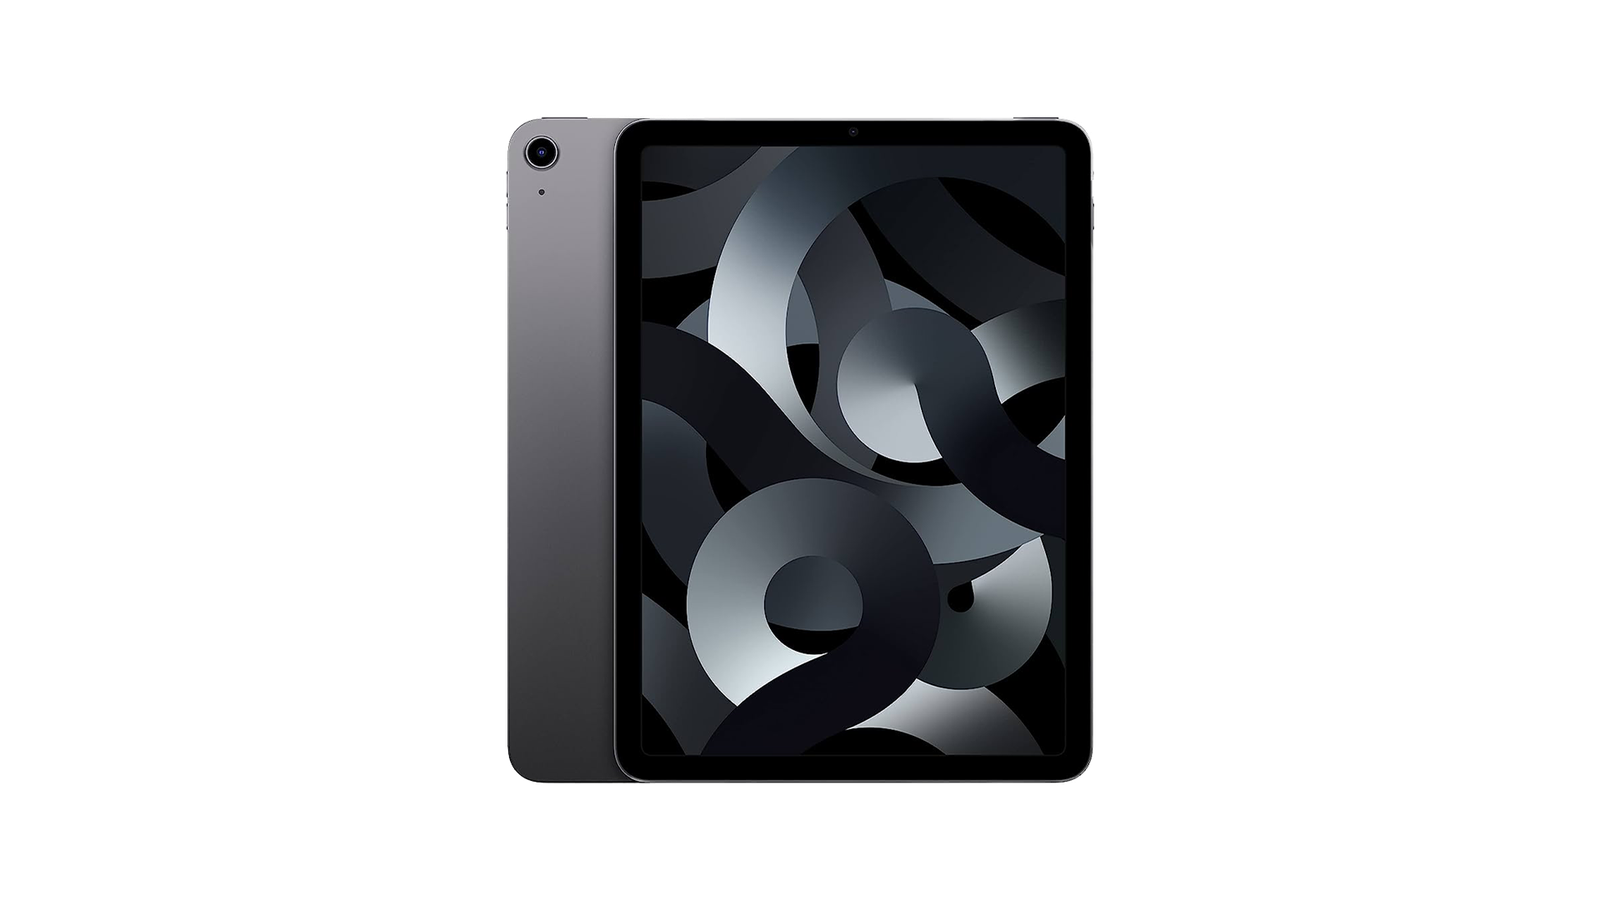 Apple iPad Air (2022) - A mid-range iPad for graphic designers who want to travel light